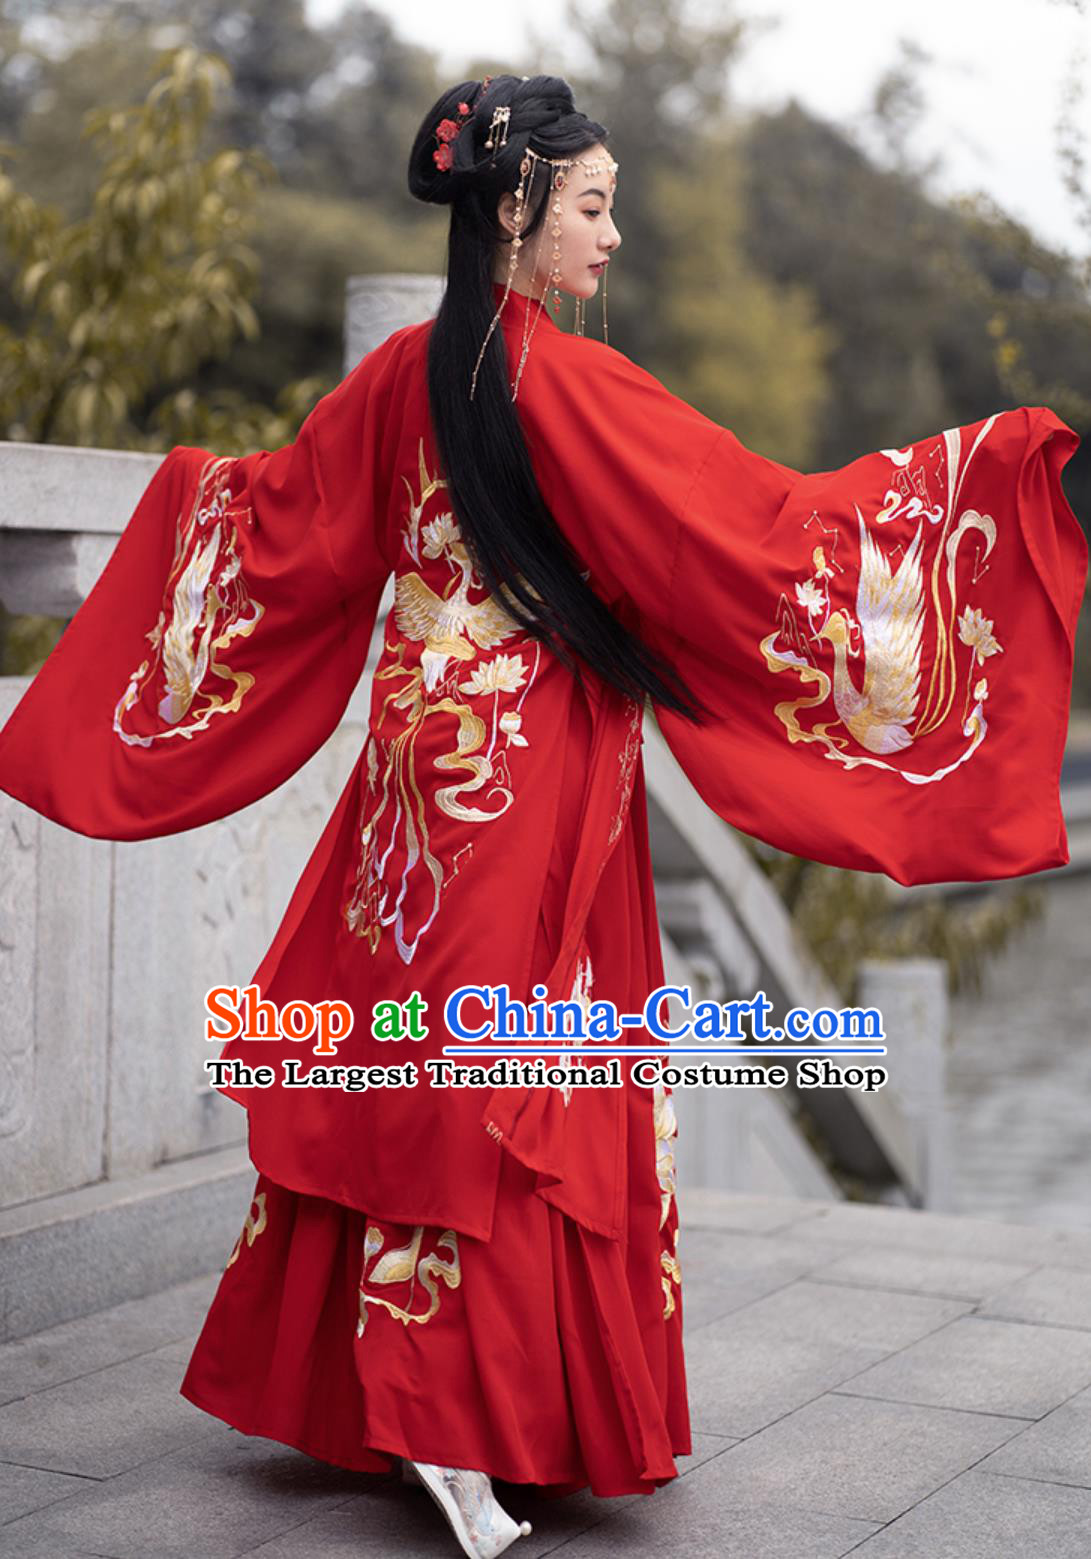 Ancient Chinese Clothing China Jin Dynasty Swordswoman Costume Traditional Wedding Hanfu Red Dresses